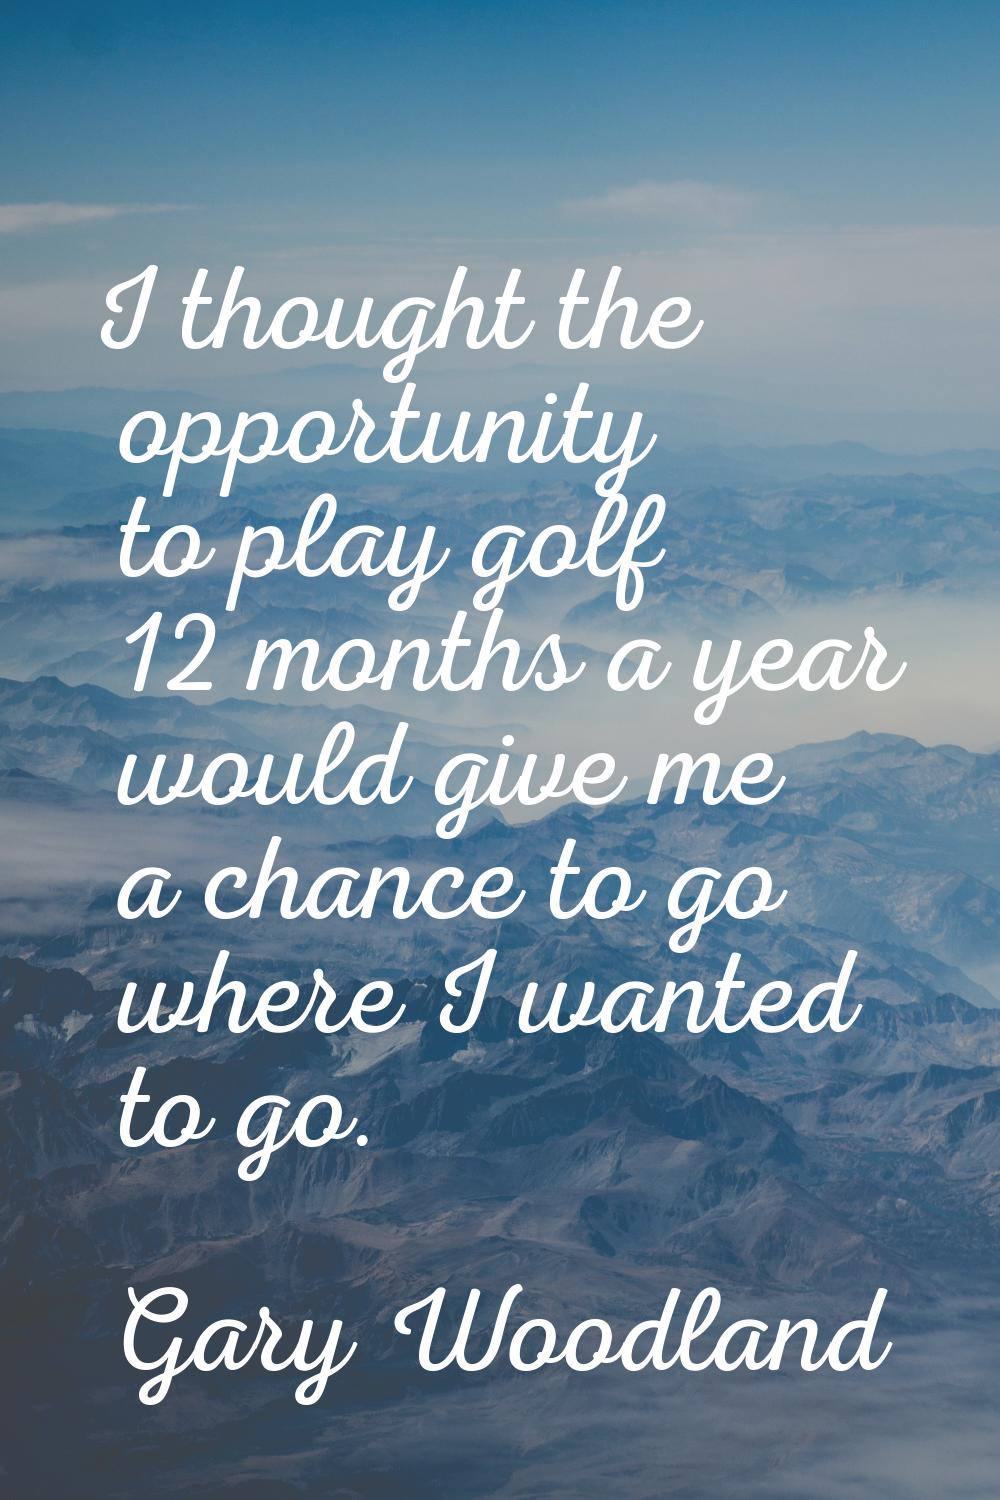 I thought the opportunity to play golf 12 months a year would give me a chance to go where I wanted